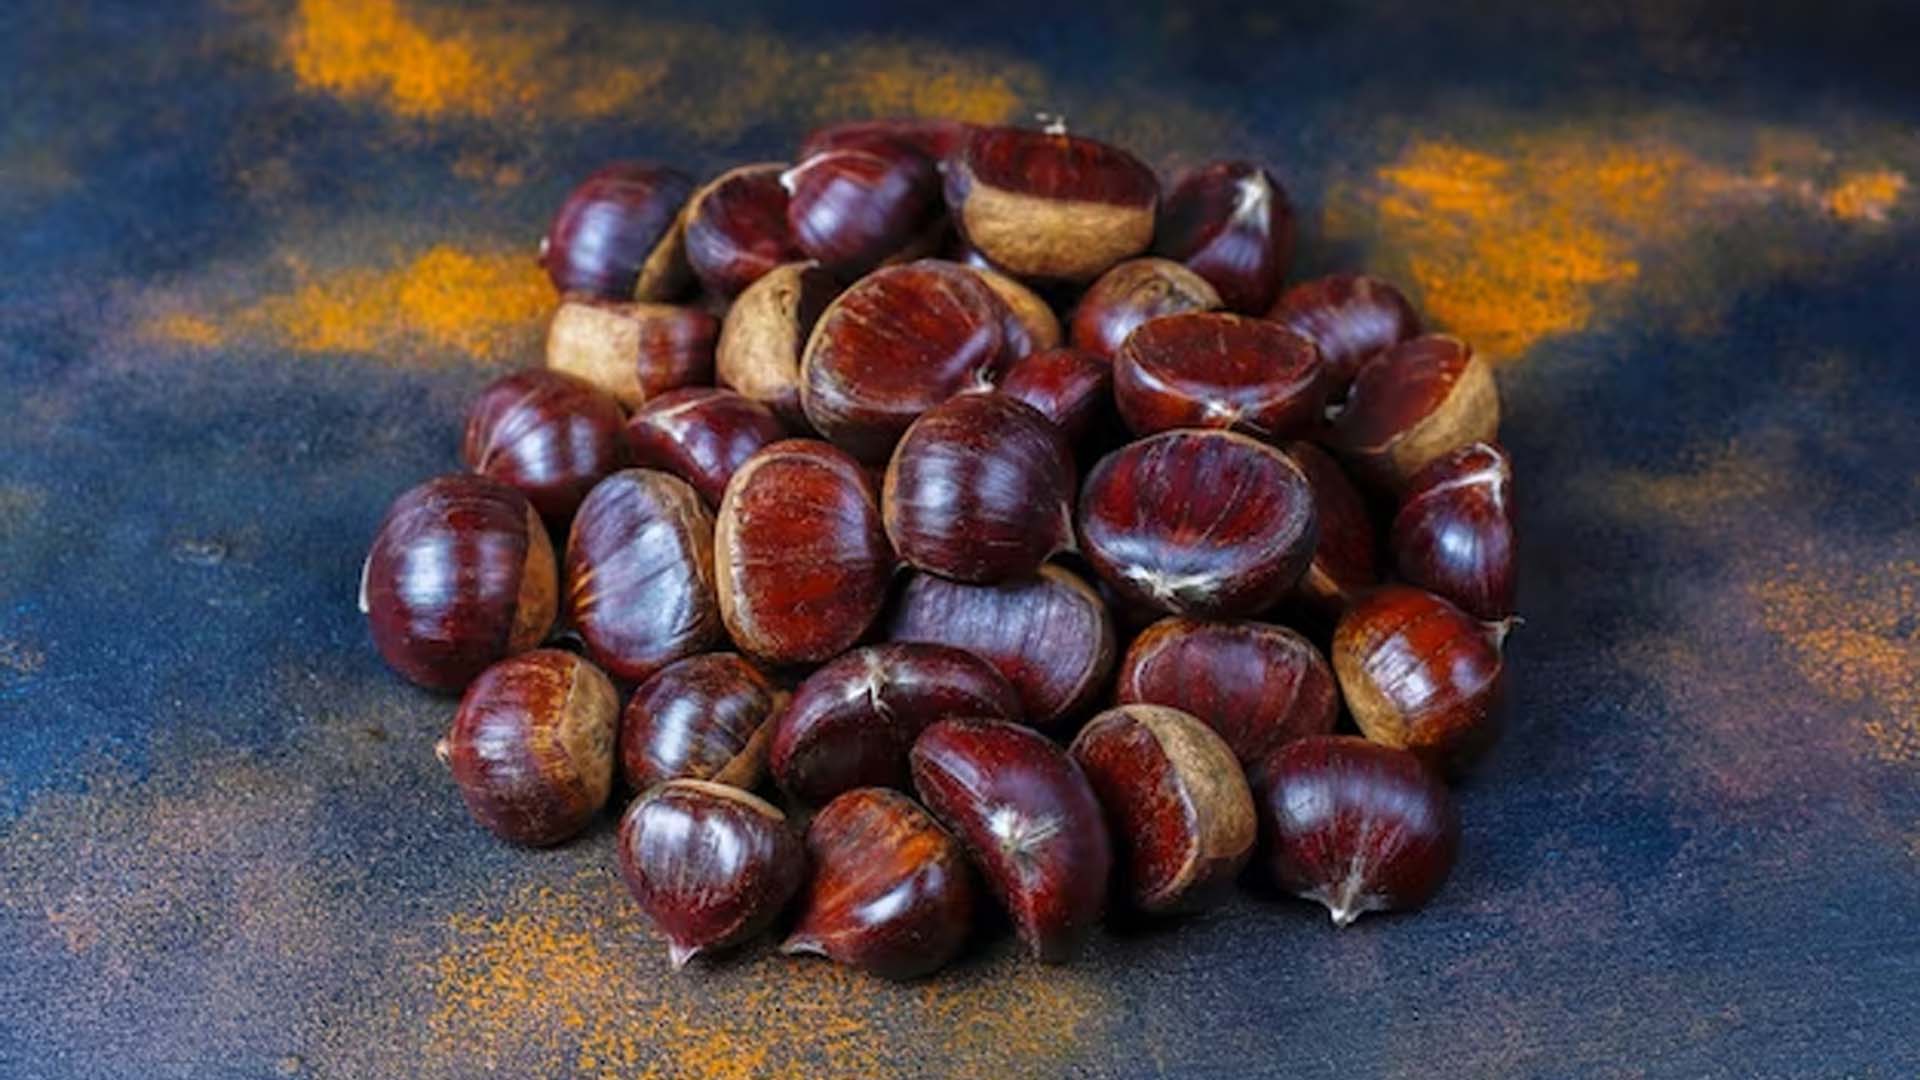 Nutritional Value of Water Chestnuts